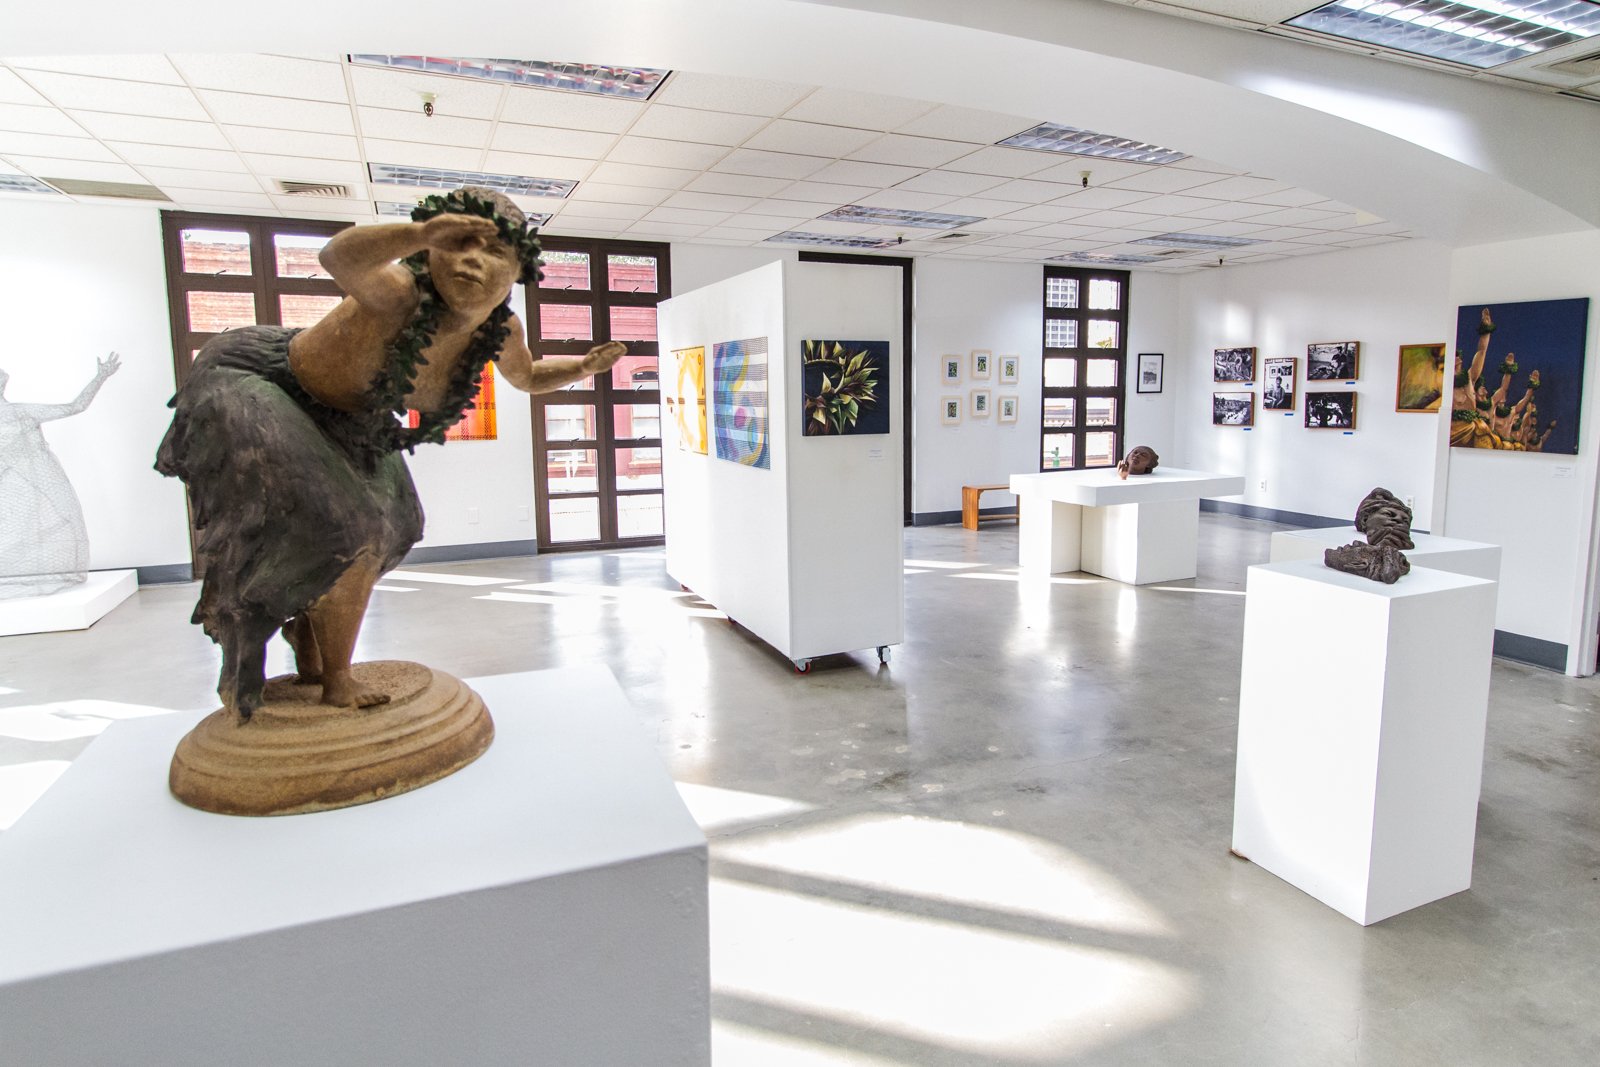  As its name implies, the Downtown Art Center (DAC) is located in Chinatown Gateway Plaza. It came to life thanks to the efforts of Sandy Pohl. Creative Arts Experience (a nonprofit Pohl founded) along with the Hawai‘i Arts Alliance and six other org